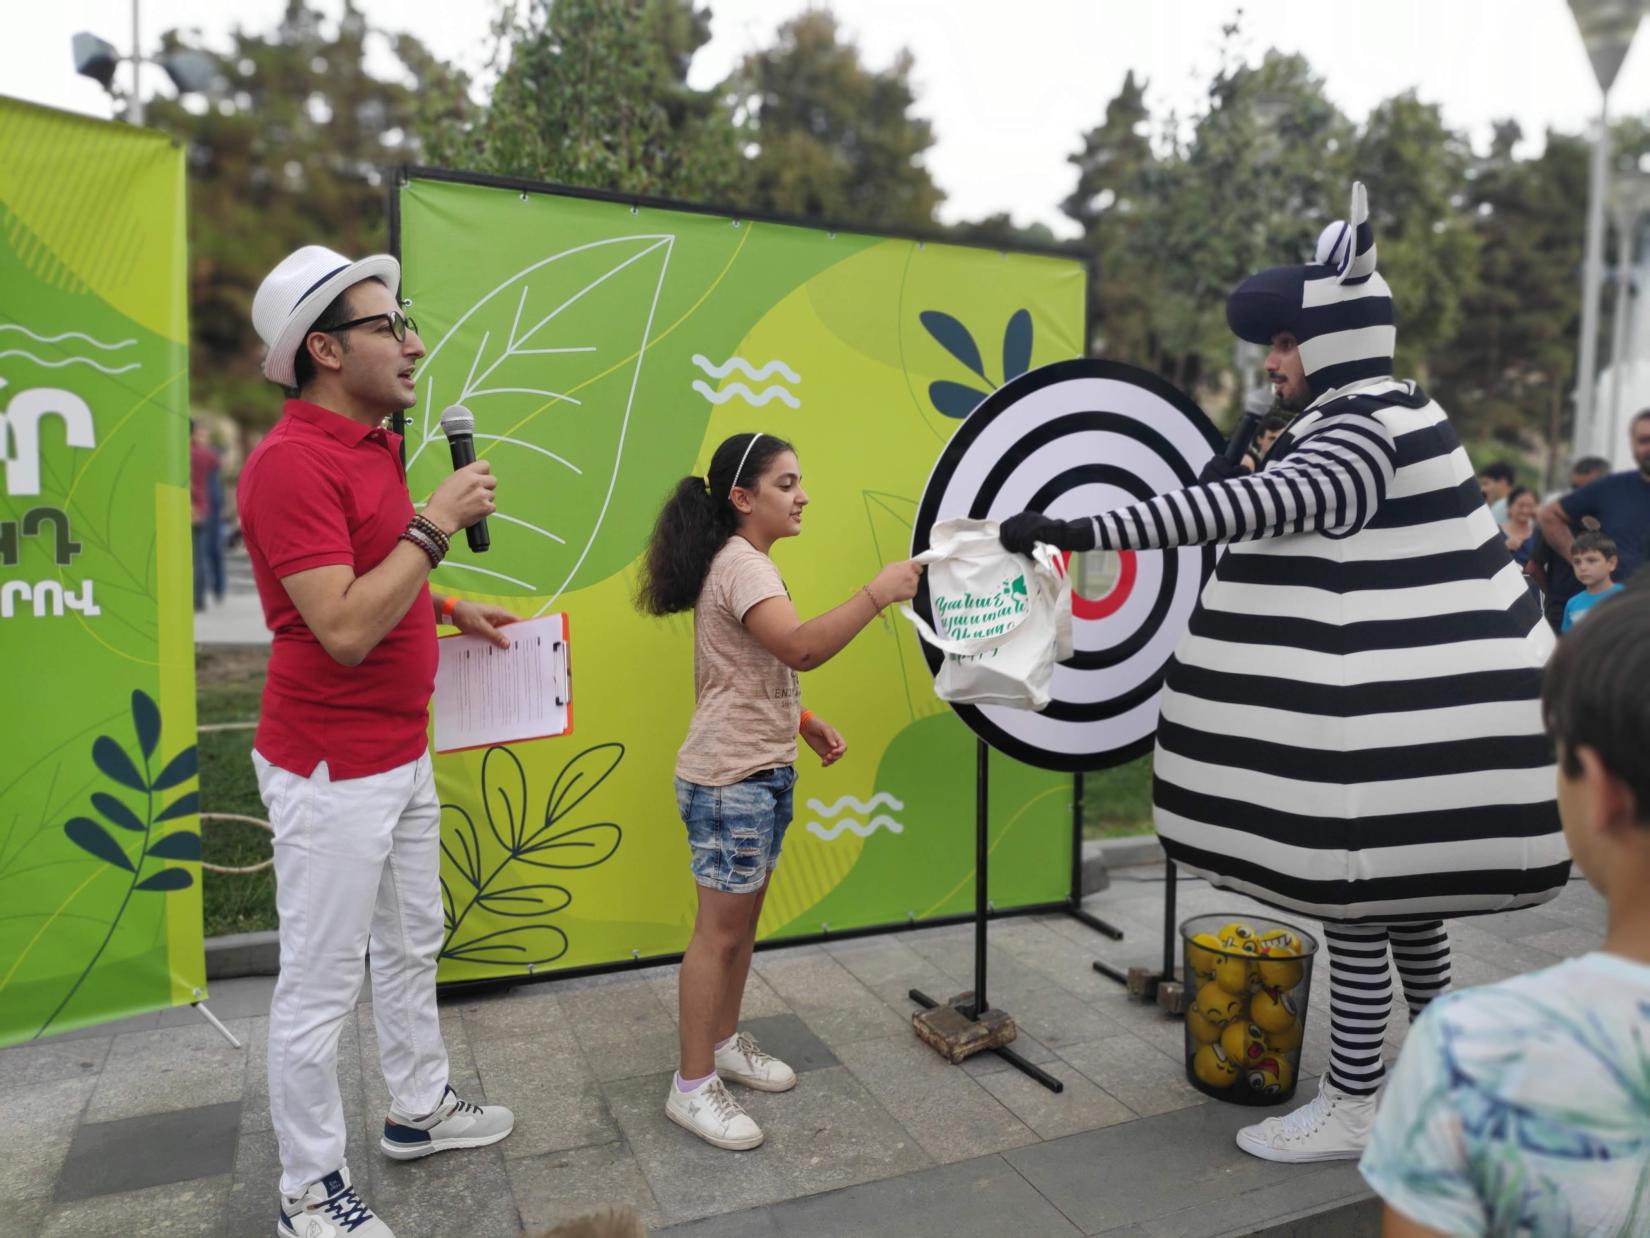 A girls receives a prize at the "Save the Planet SDGs" fun and educational Zebra Game.